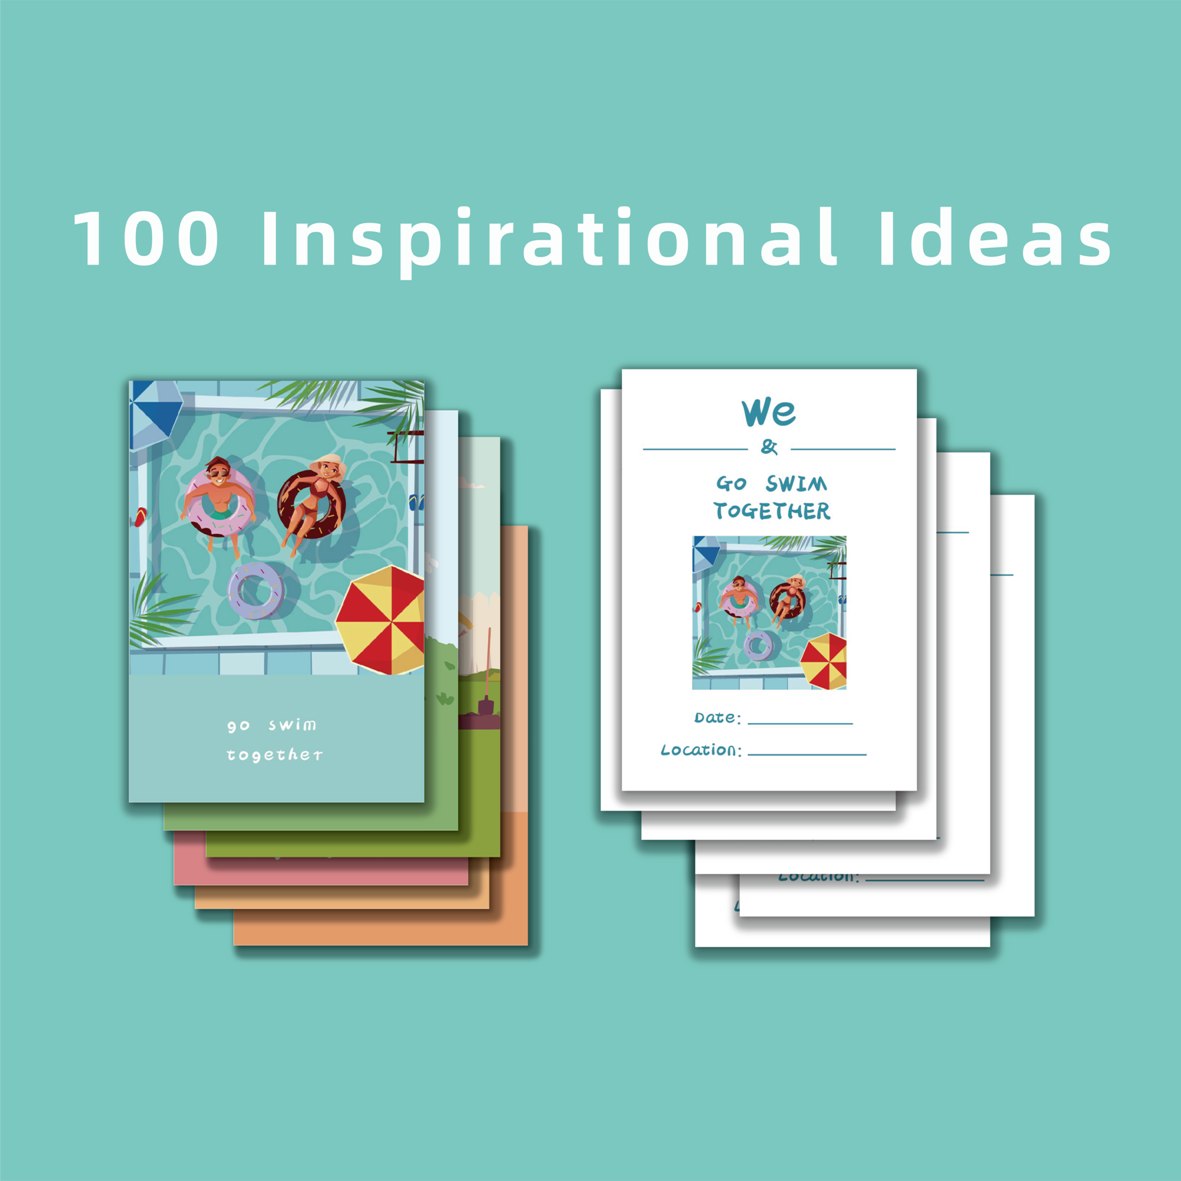 100 Things for Couples to Do Together - A Funny Relationship Game and Date Ideas for Love Journal